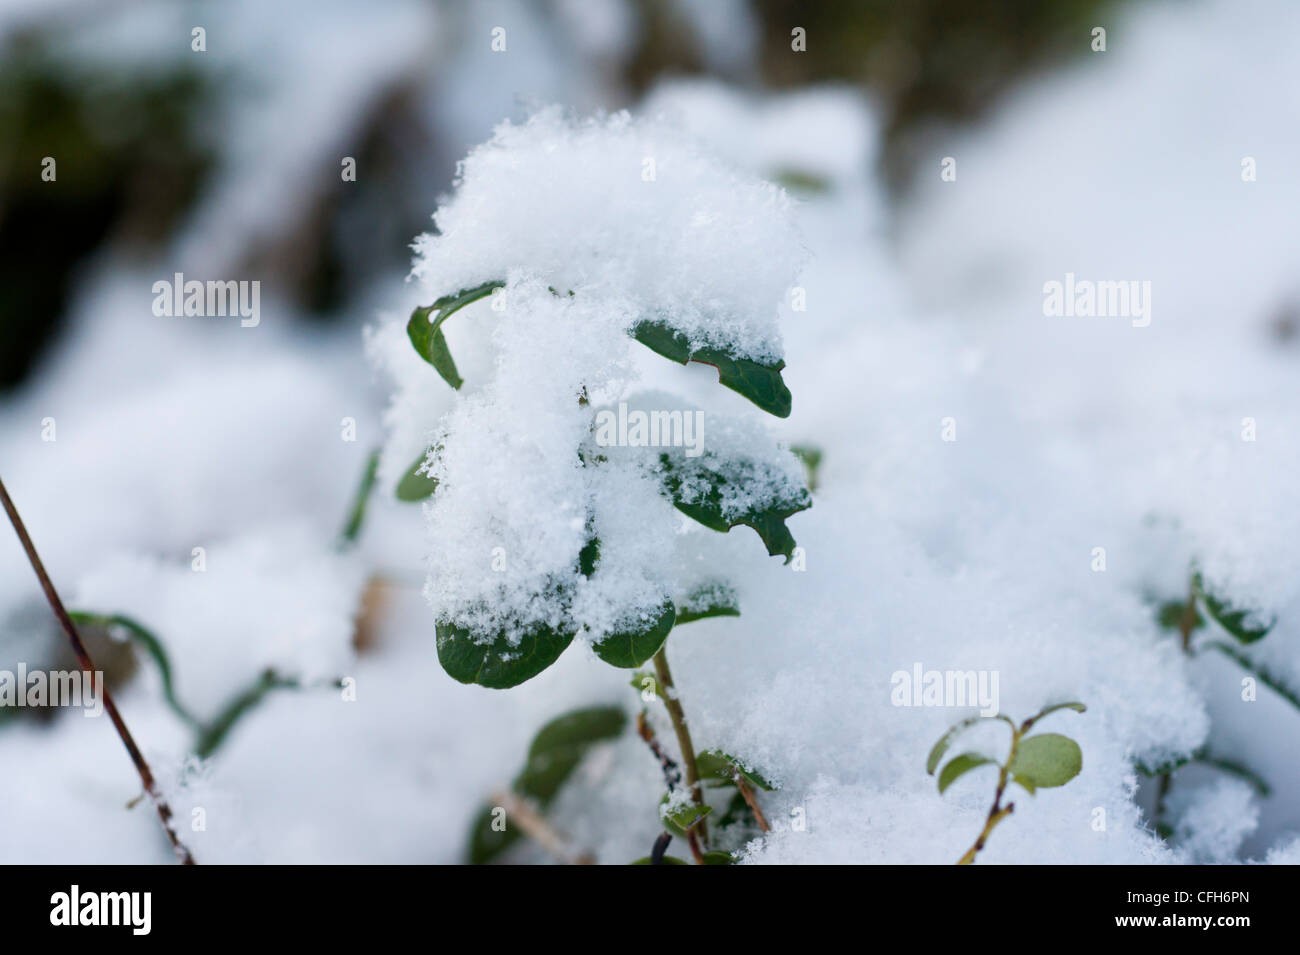 lingonberry or cowberryplants covered in snow in Ruissalo, Turku, Finland Stock Photo